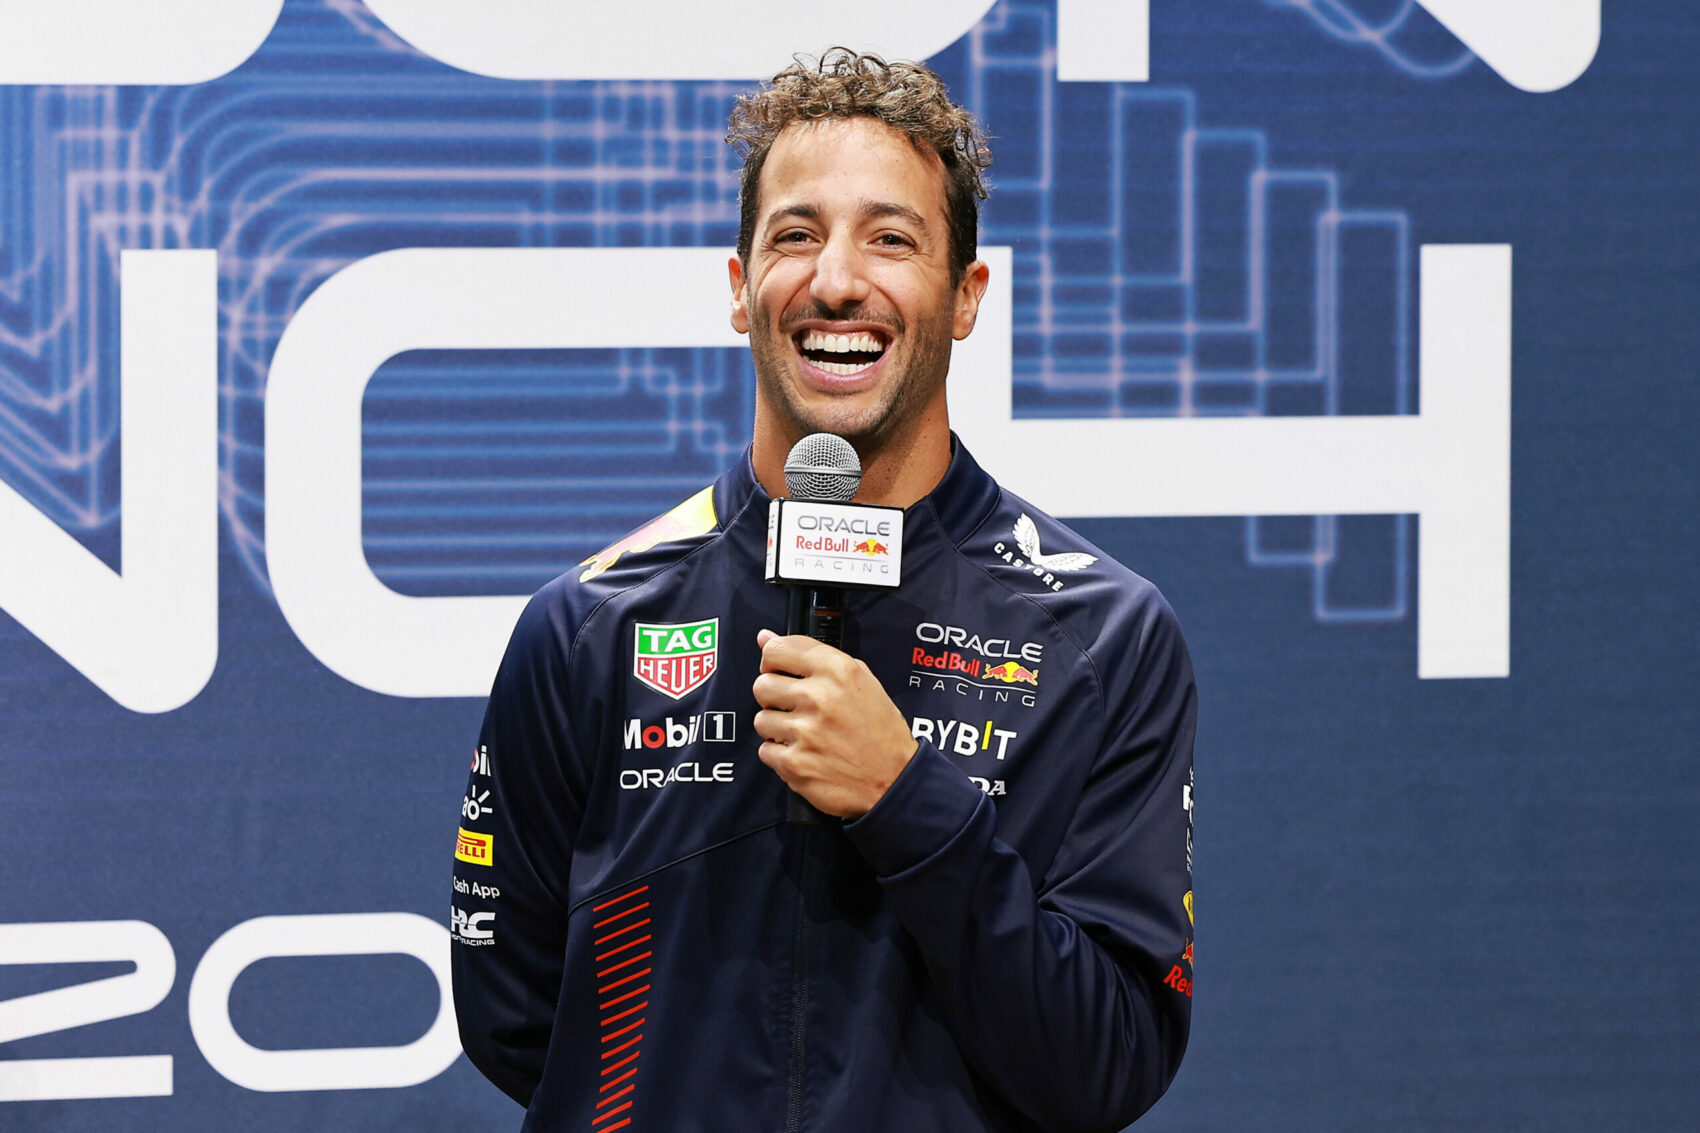 Ricciardo could appear in the shower and we have who could “replace” him on Netflix